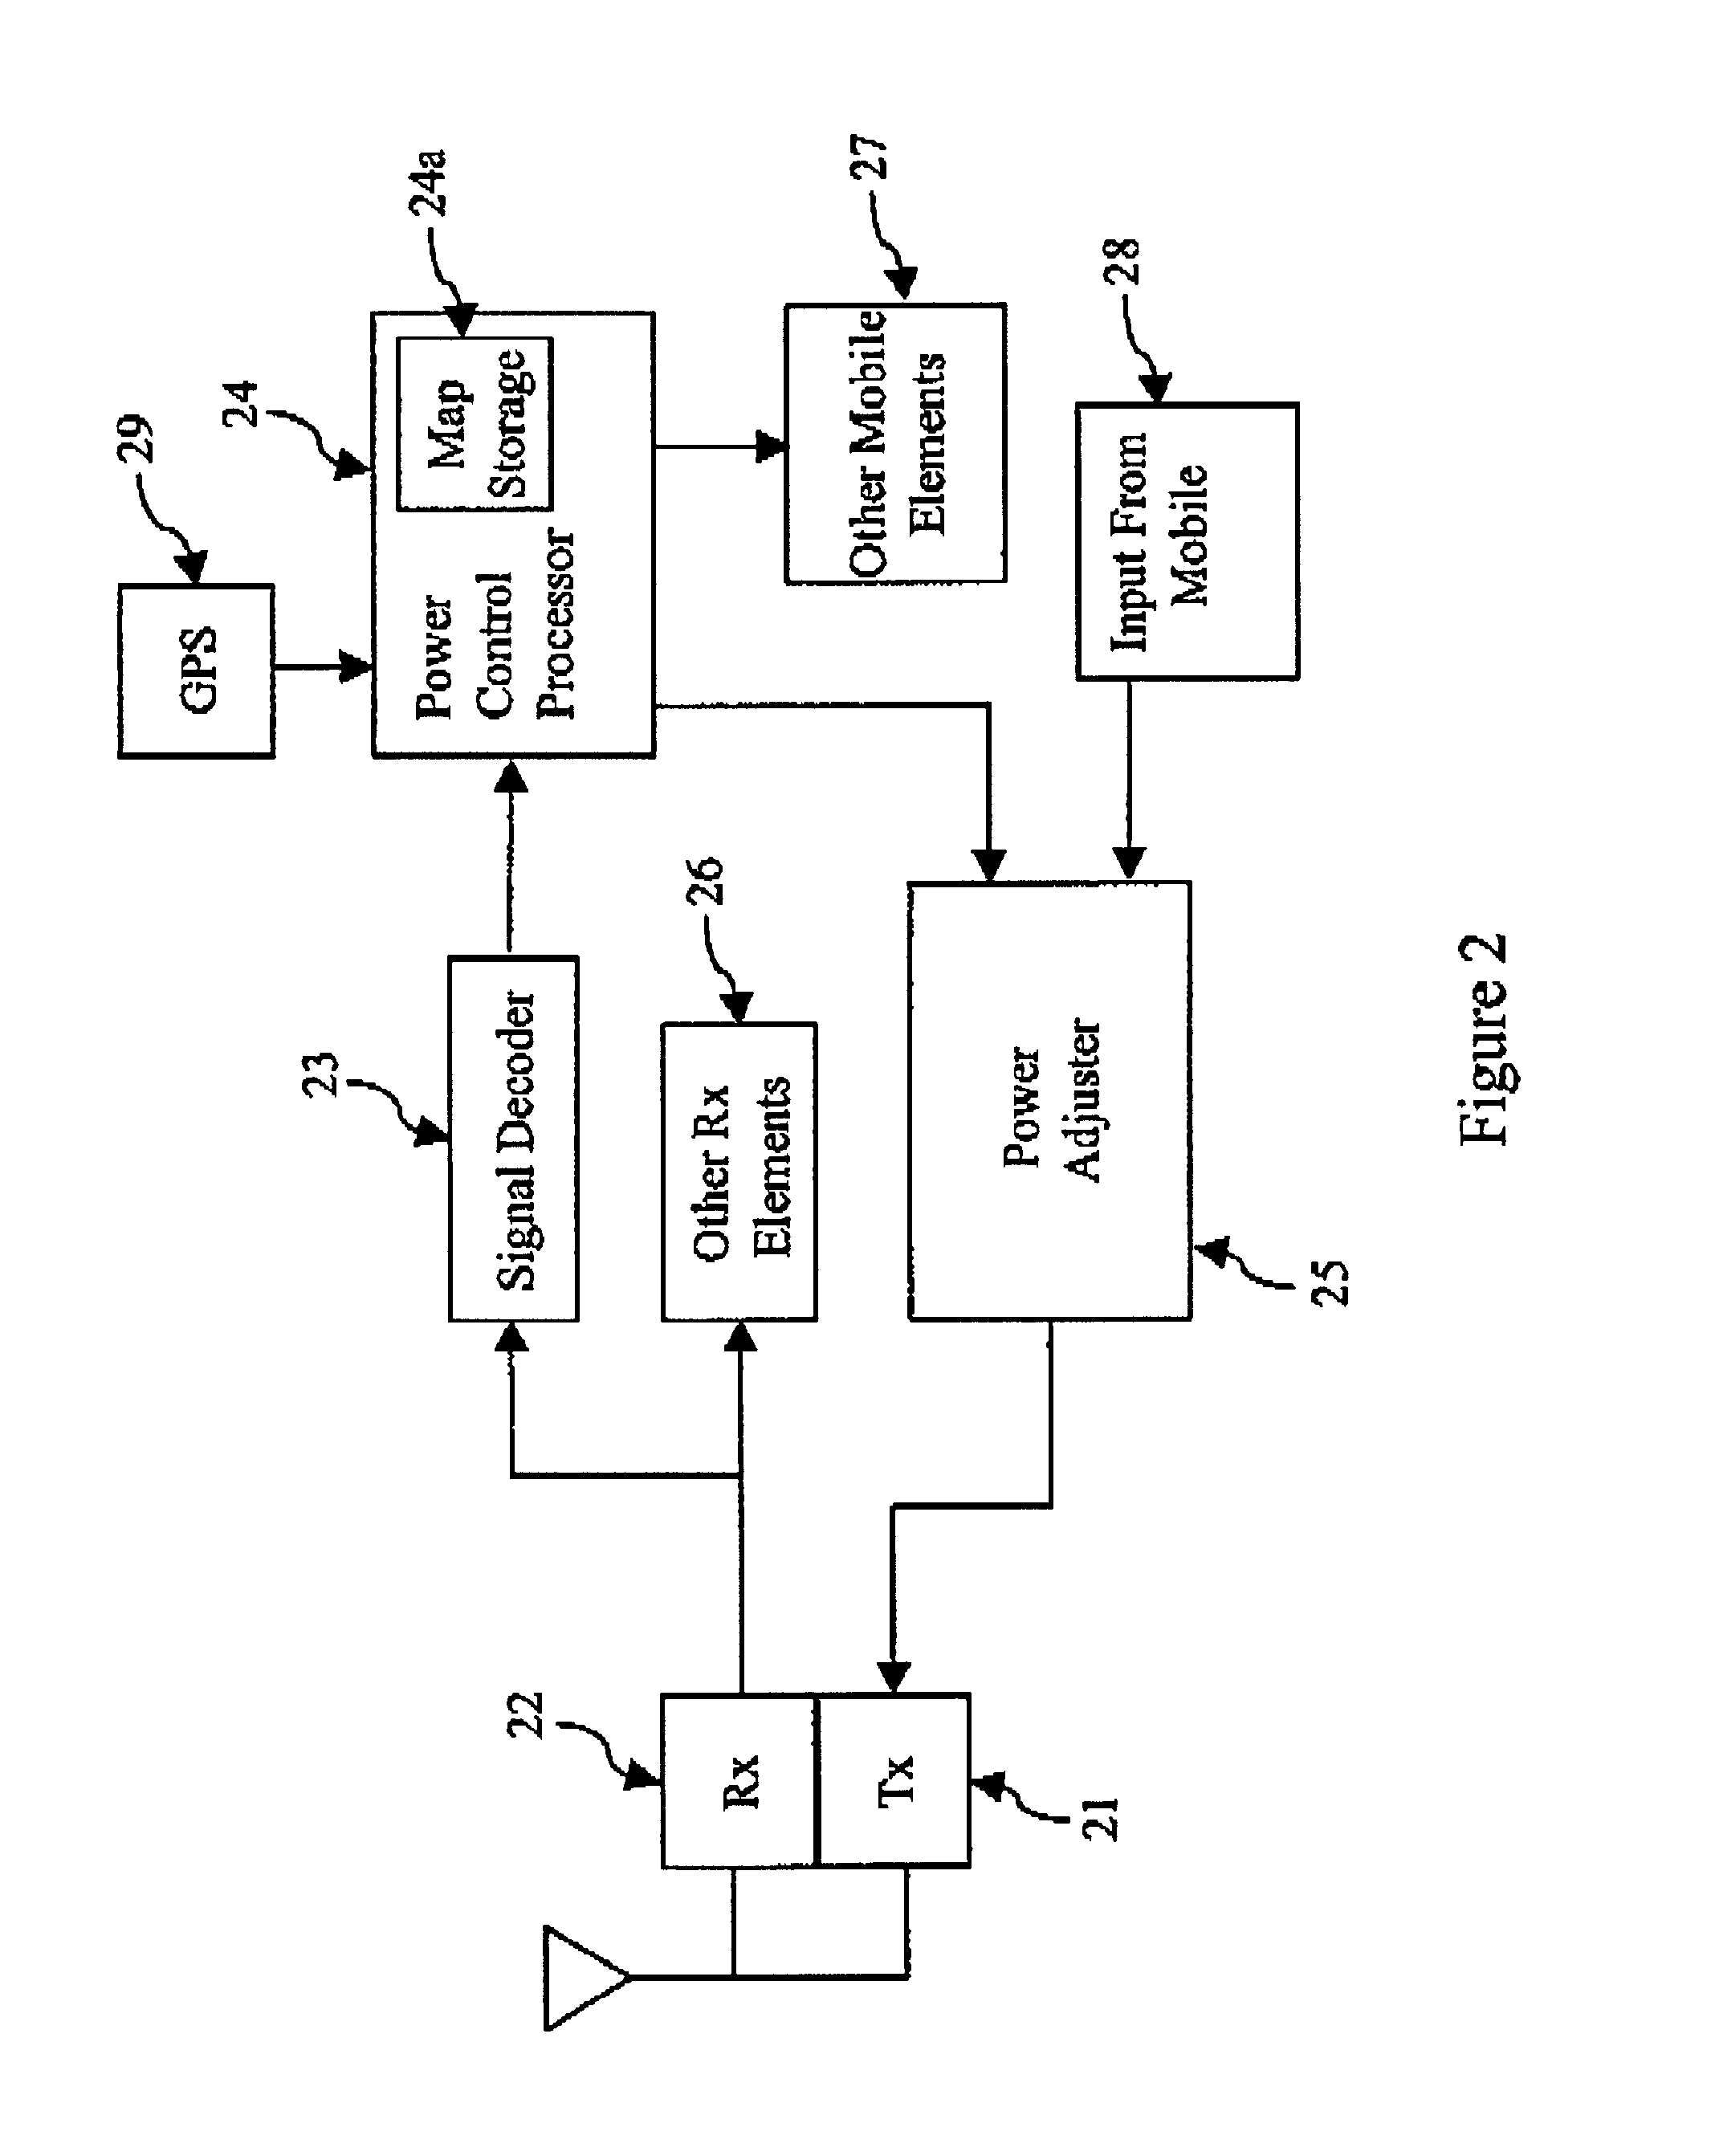 Location based power control for mobile communications systems